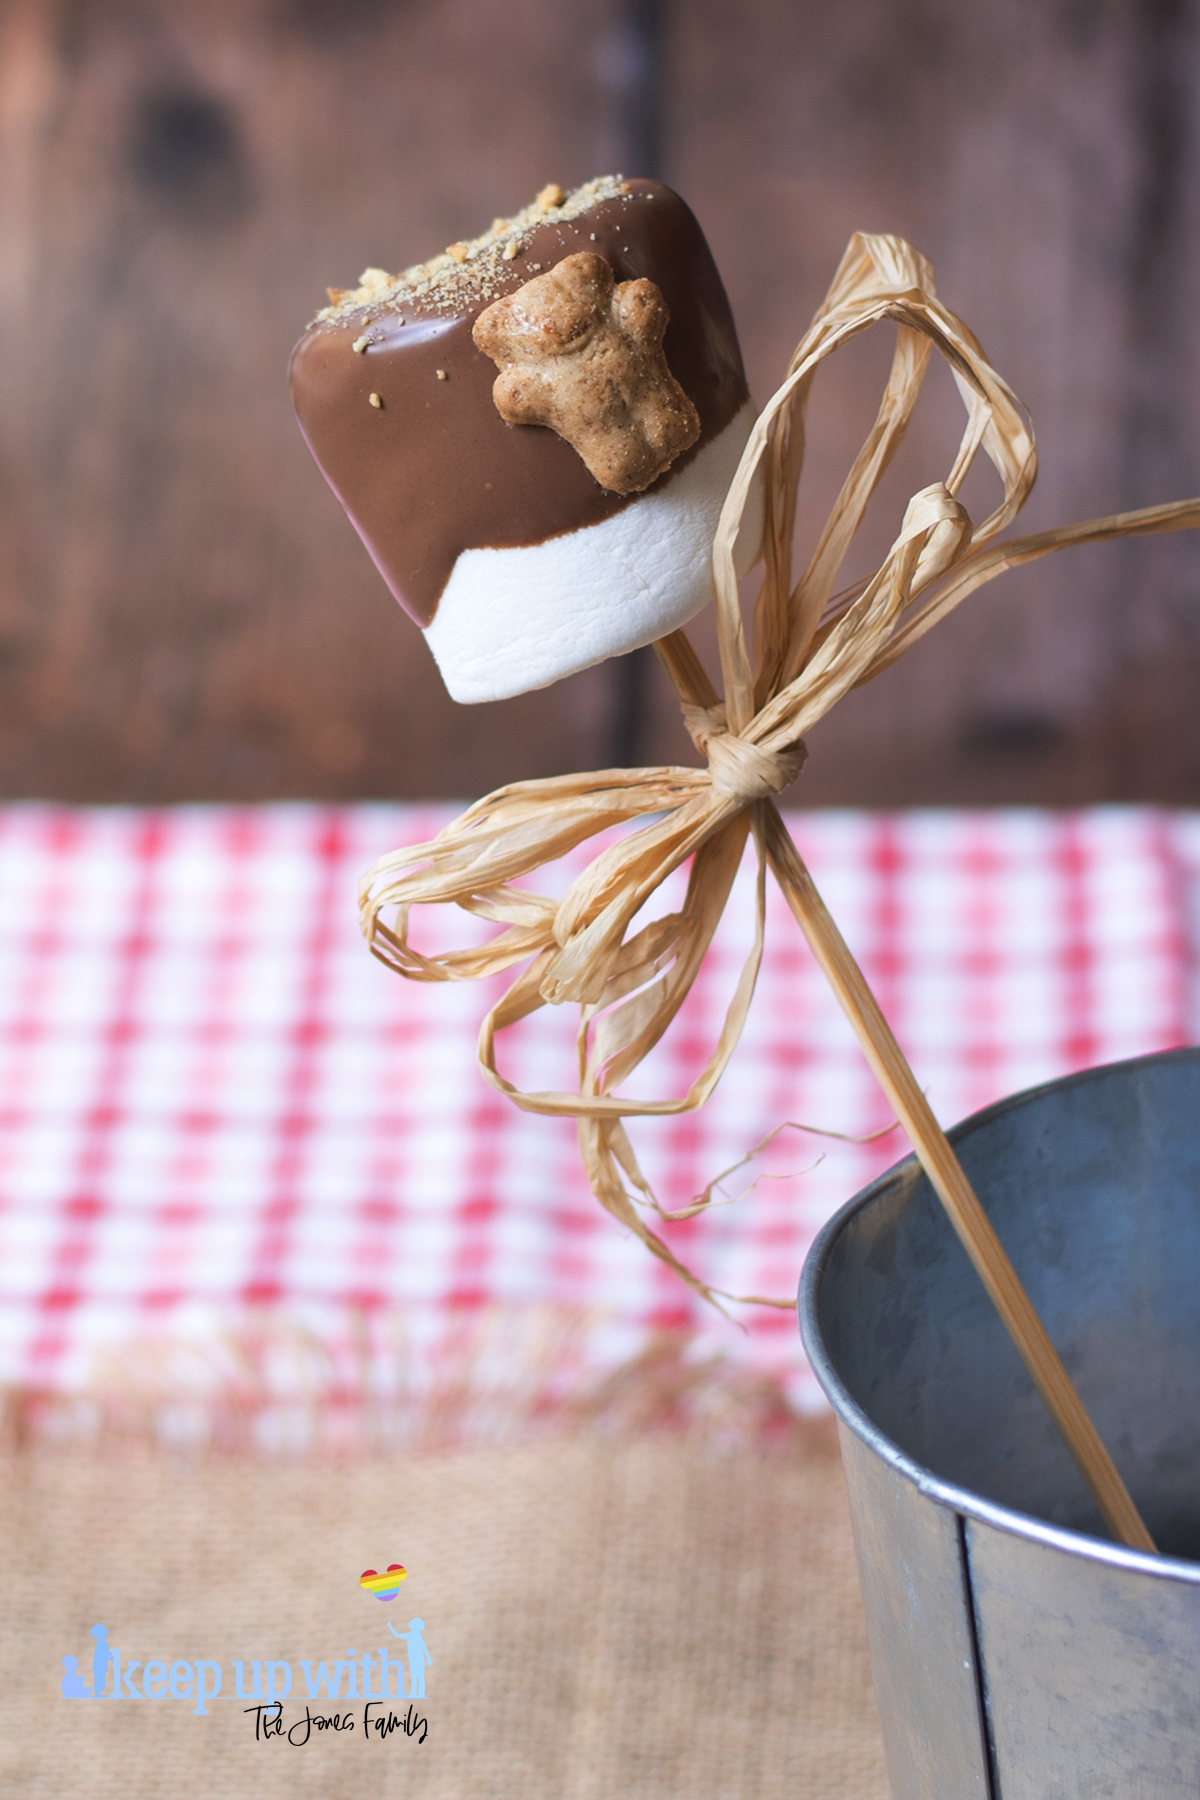 Image shows one teddy bear s'mores pop. Image by keep up with the jones family.